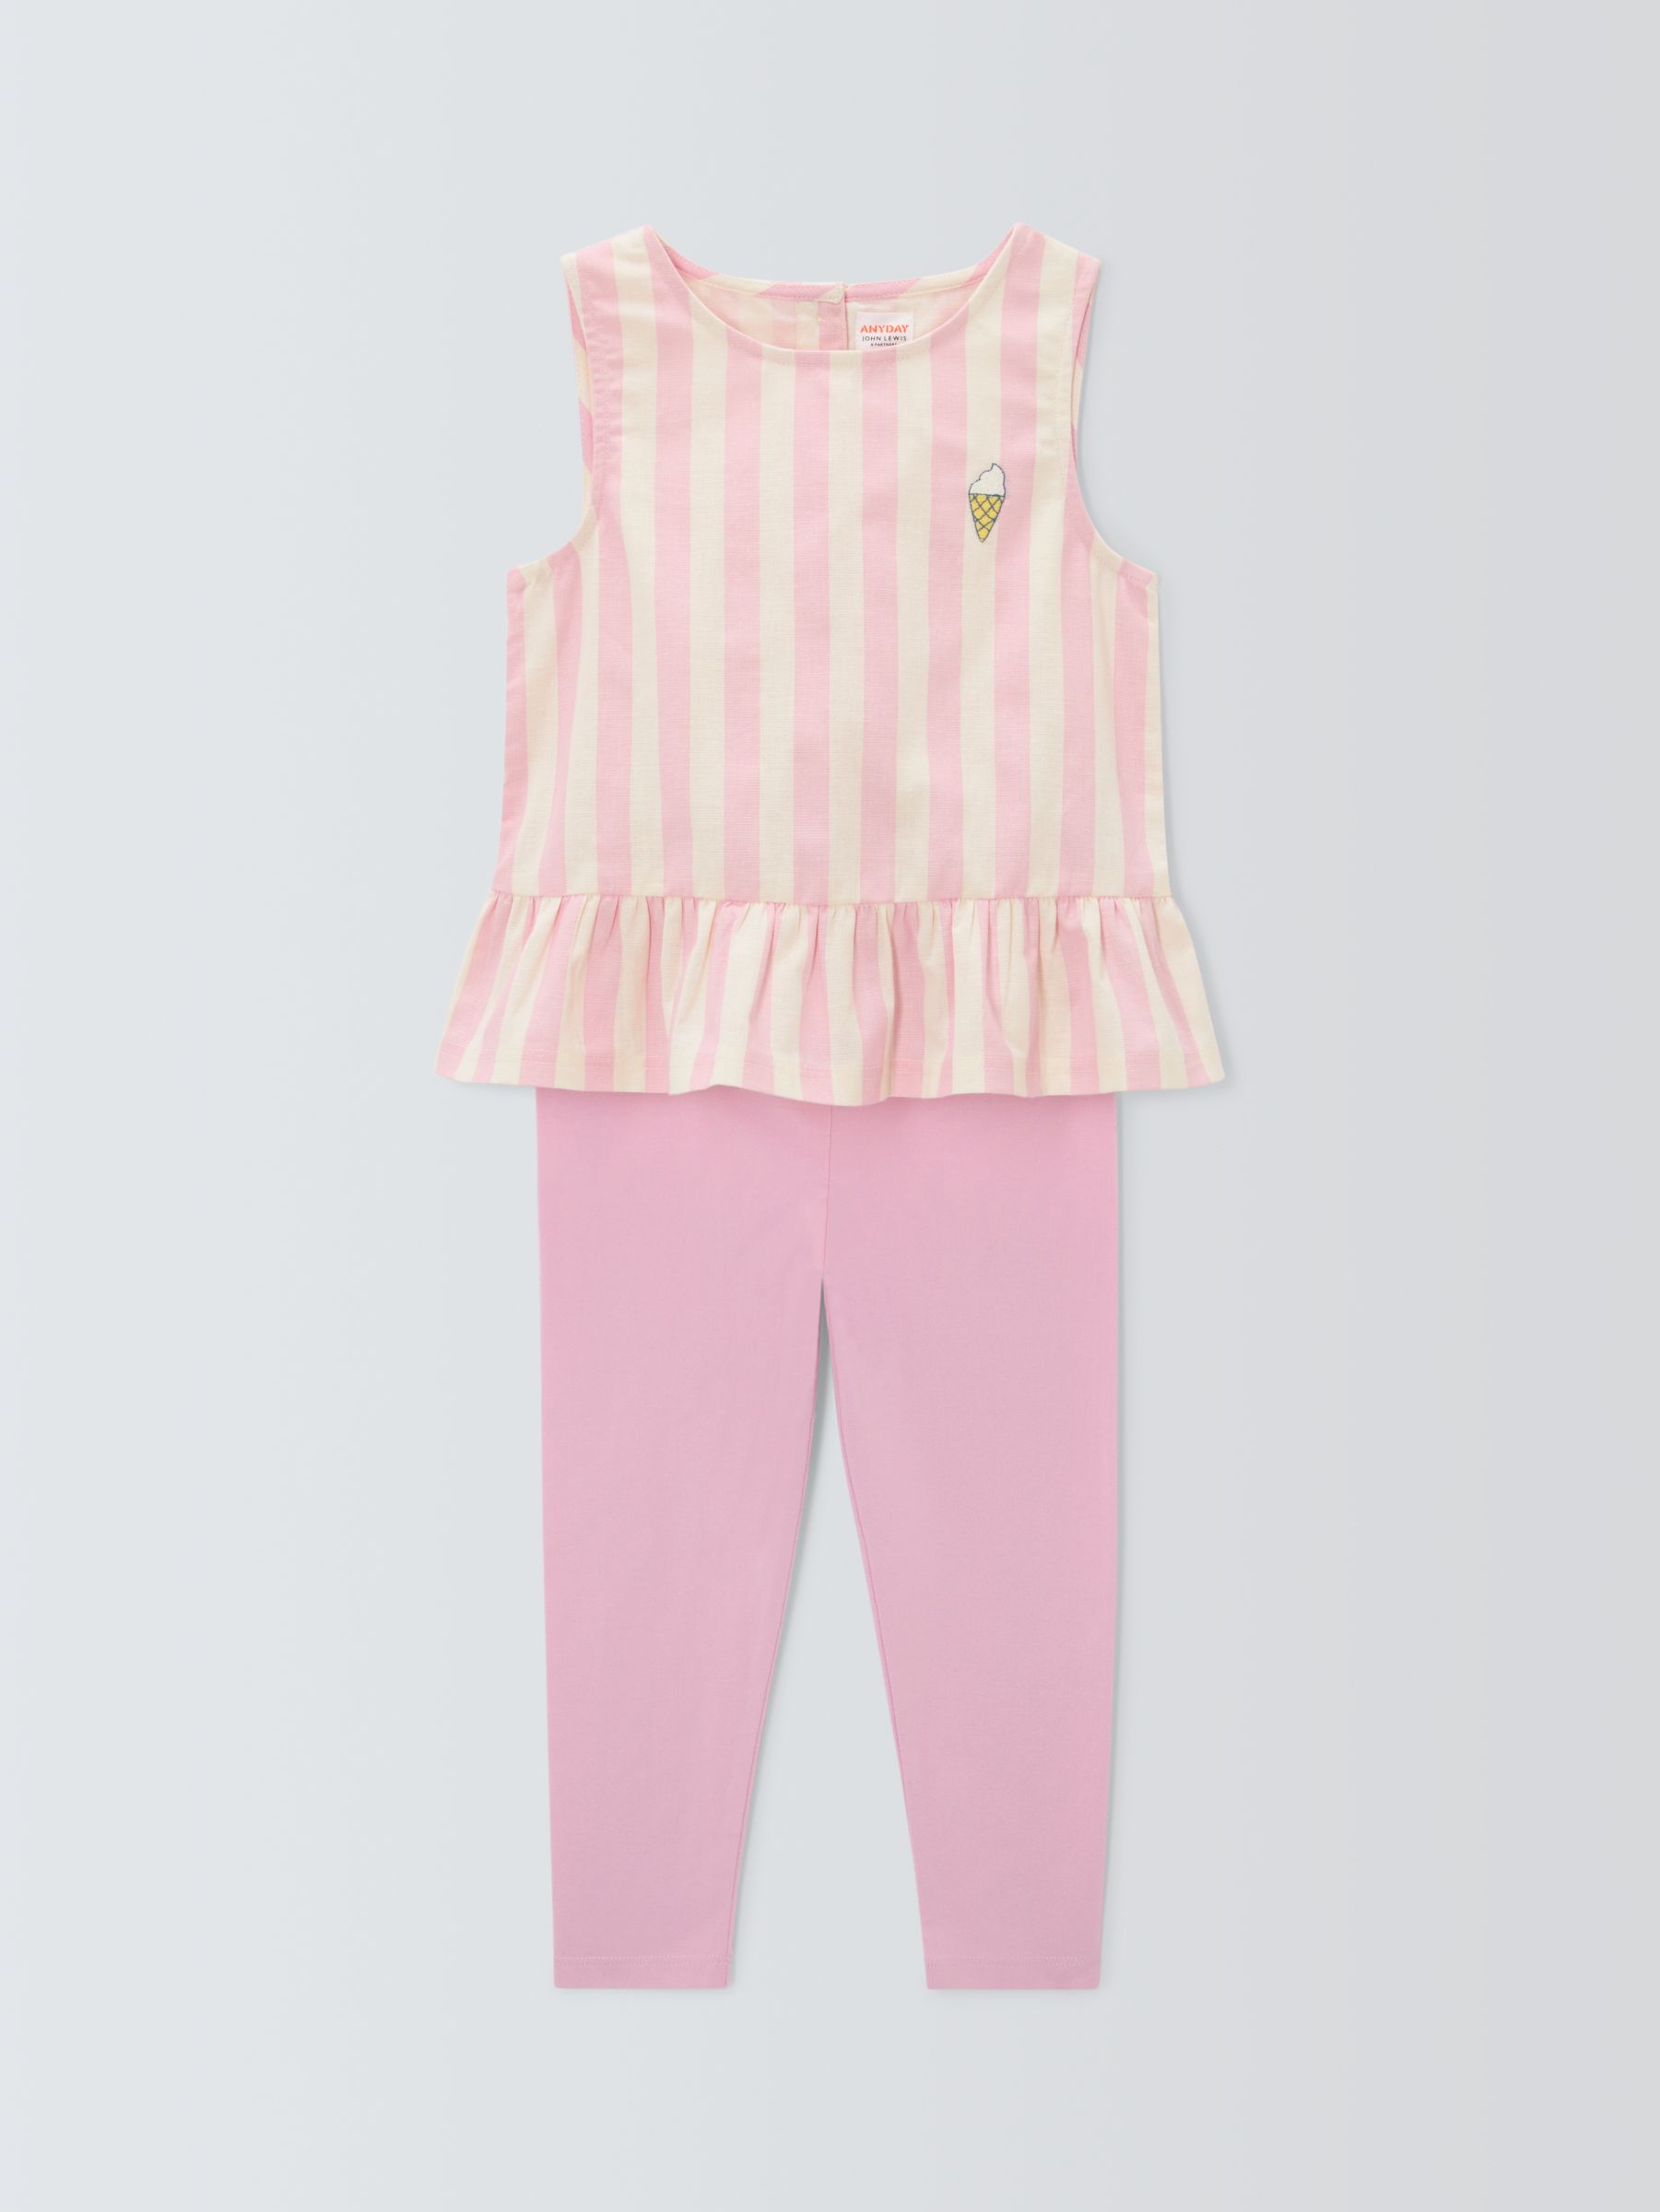 John Lewis ANYDAY Baby Peplum Top and Leggings Outfit, Pink, 2-3 years